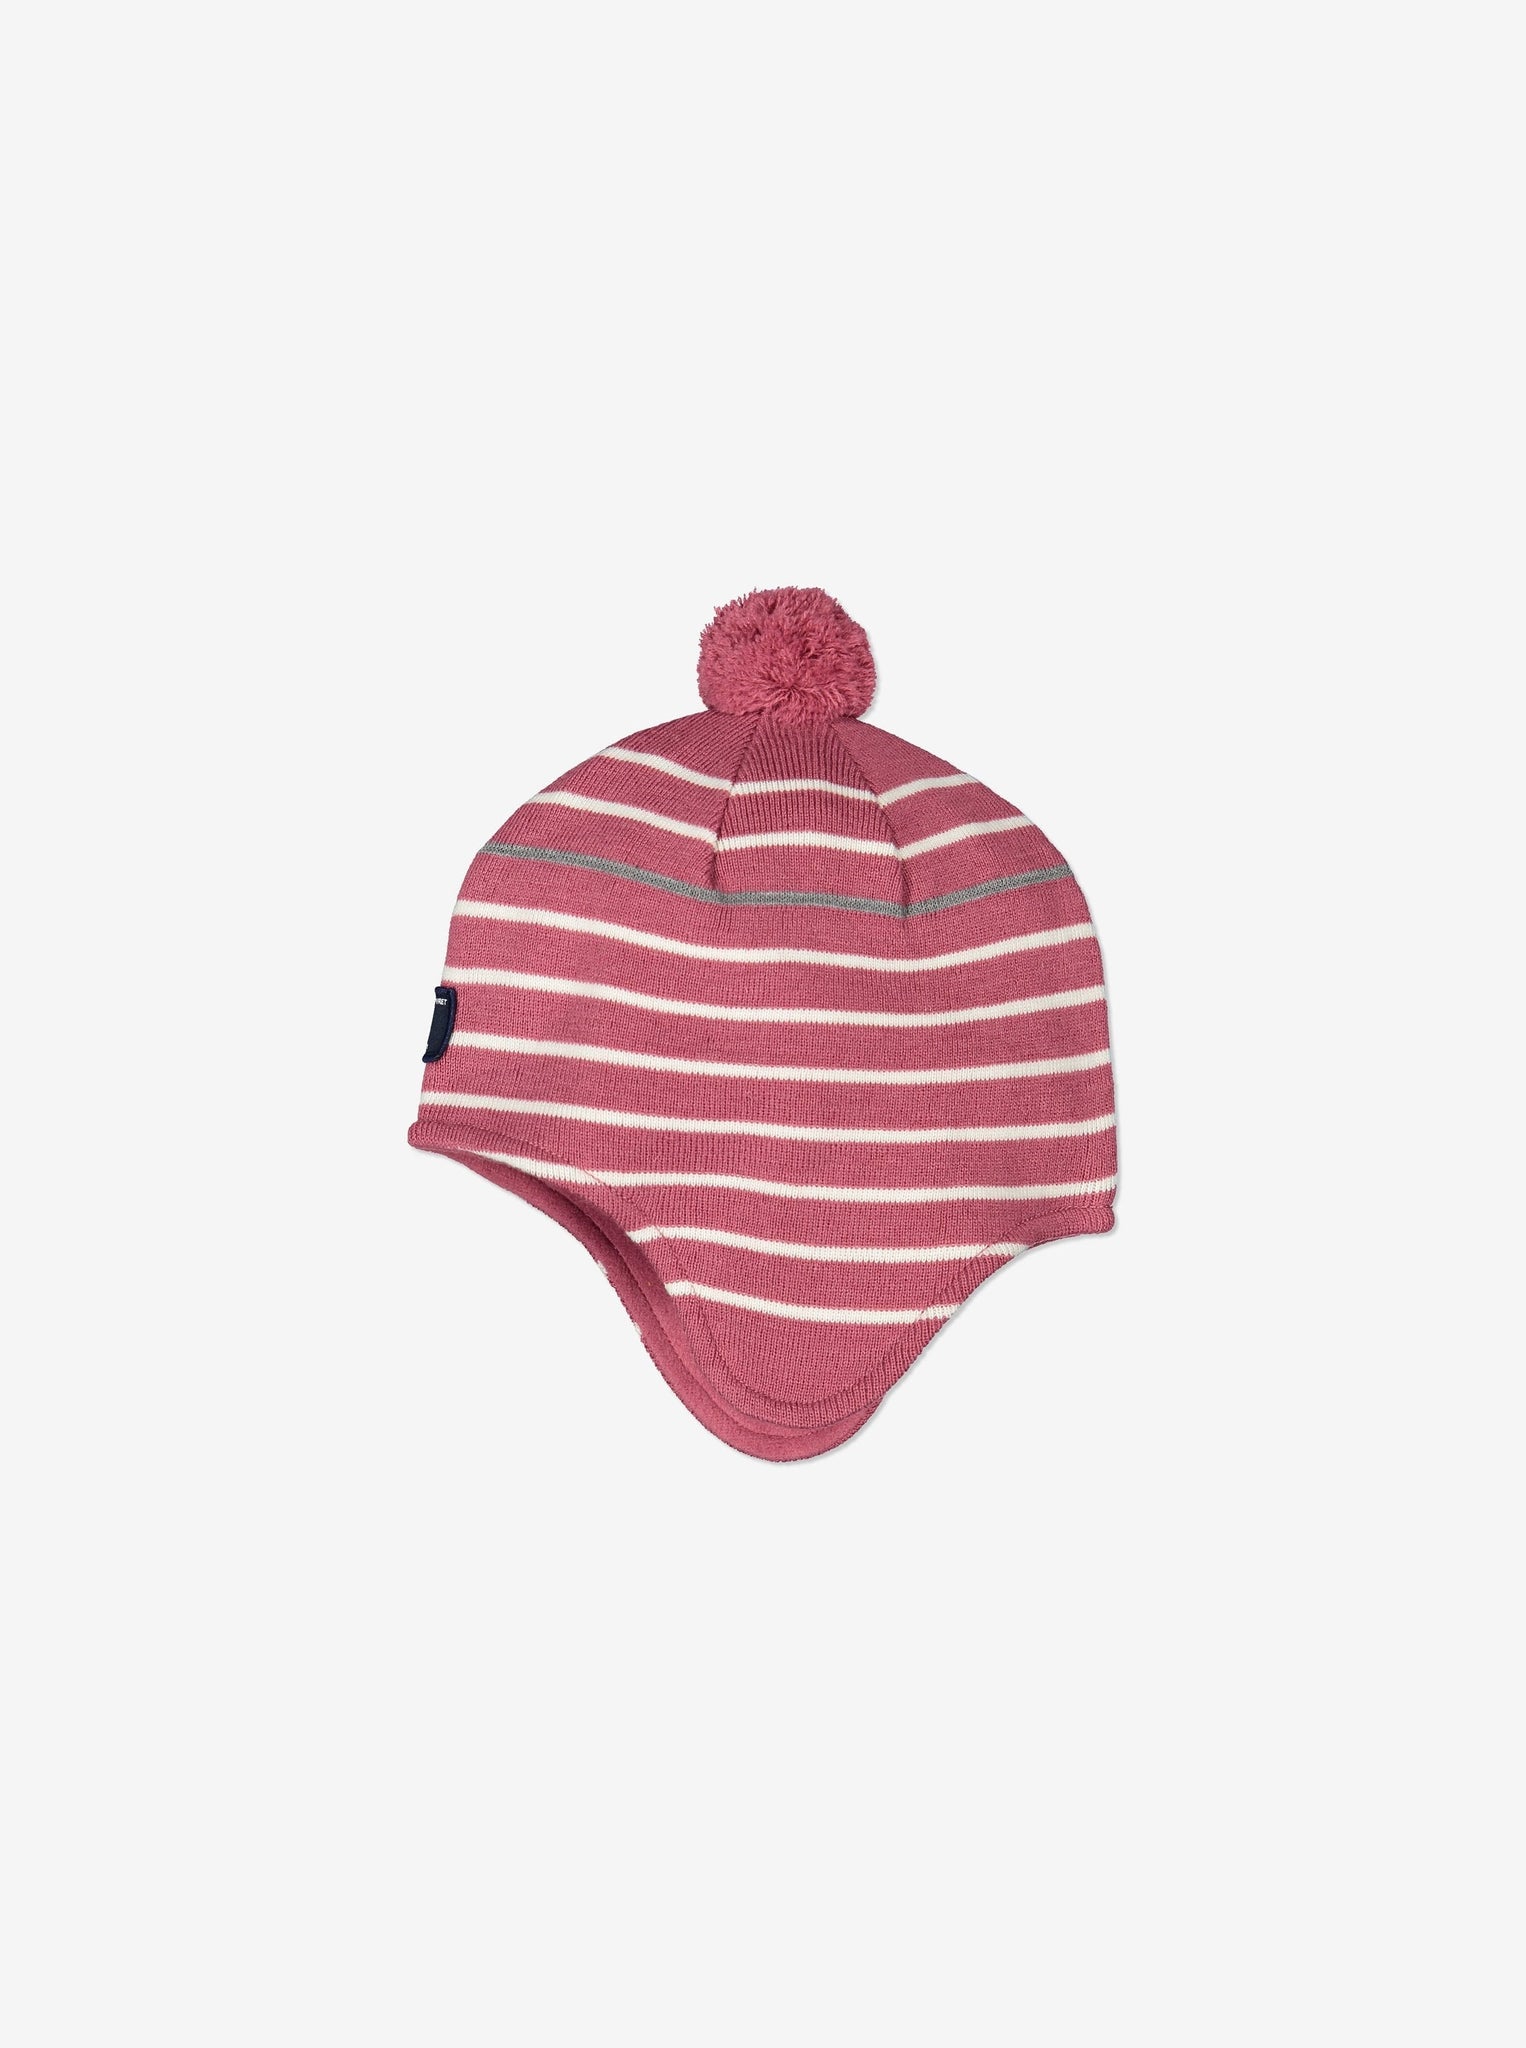 Merino Wool Pink Kids Bobble Hat from the Polarn O. Pyret kidswear collection. Ethically produced outerwear.